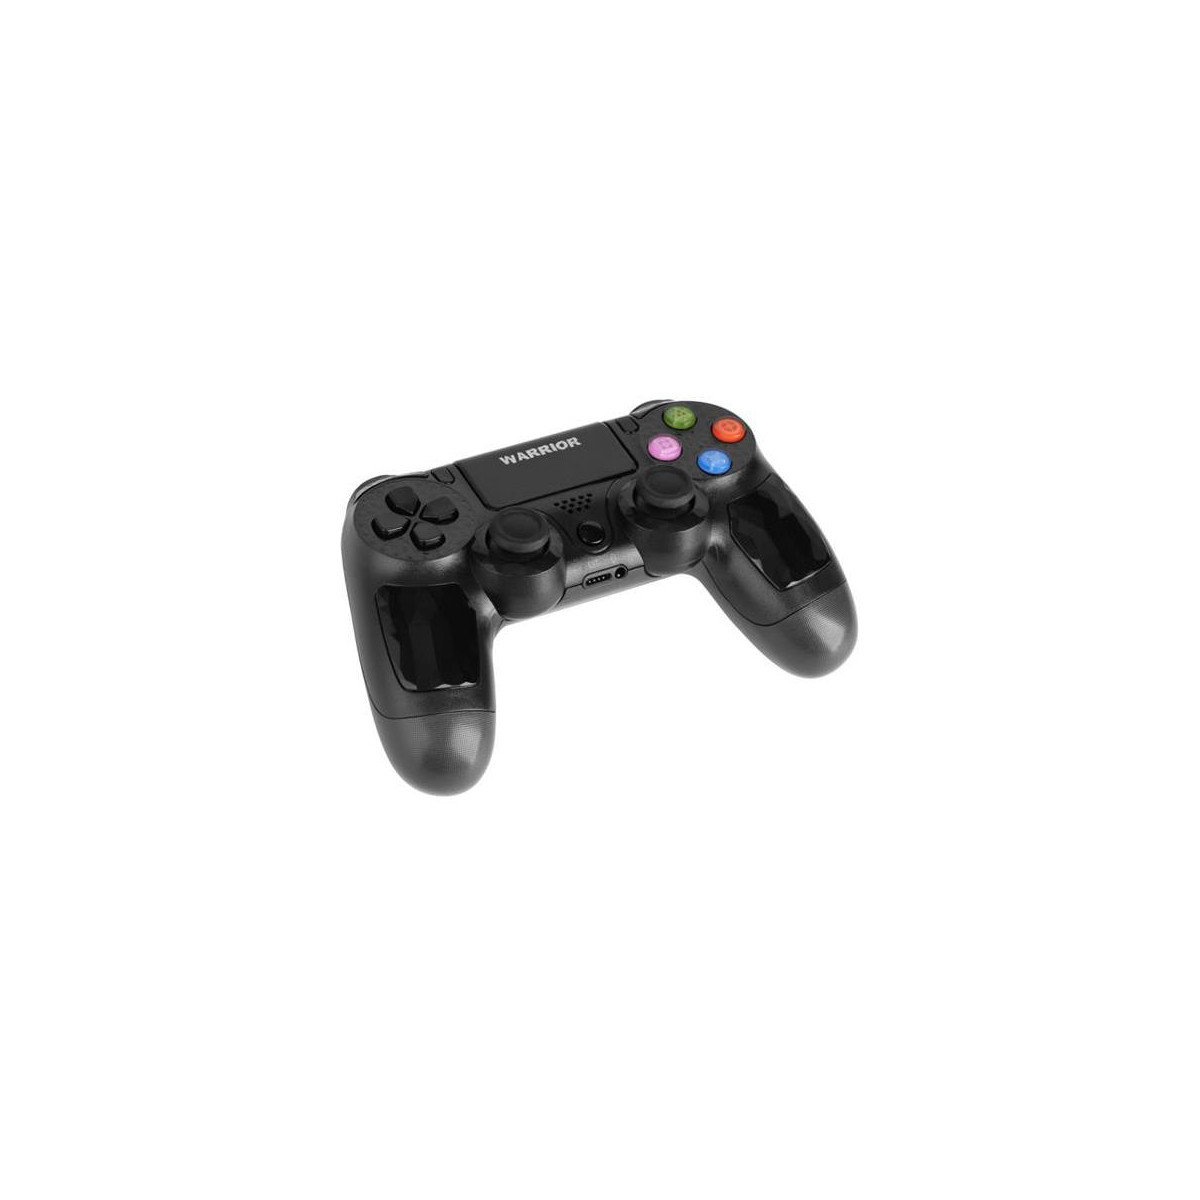 More about Gamepad KRUGER & MATZ KM0771 pro PS 4 / PC